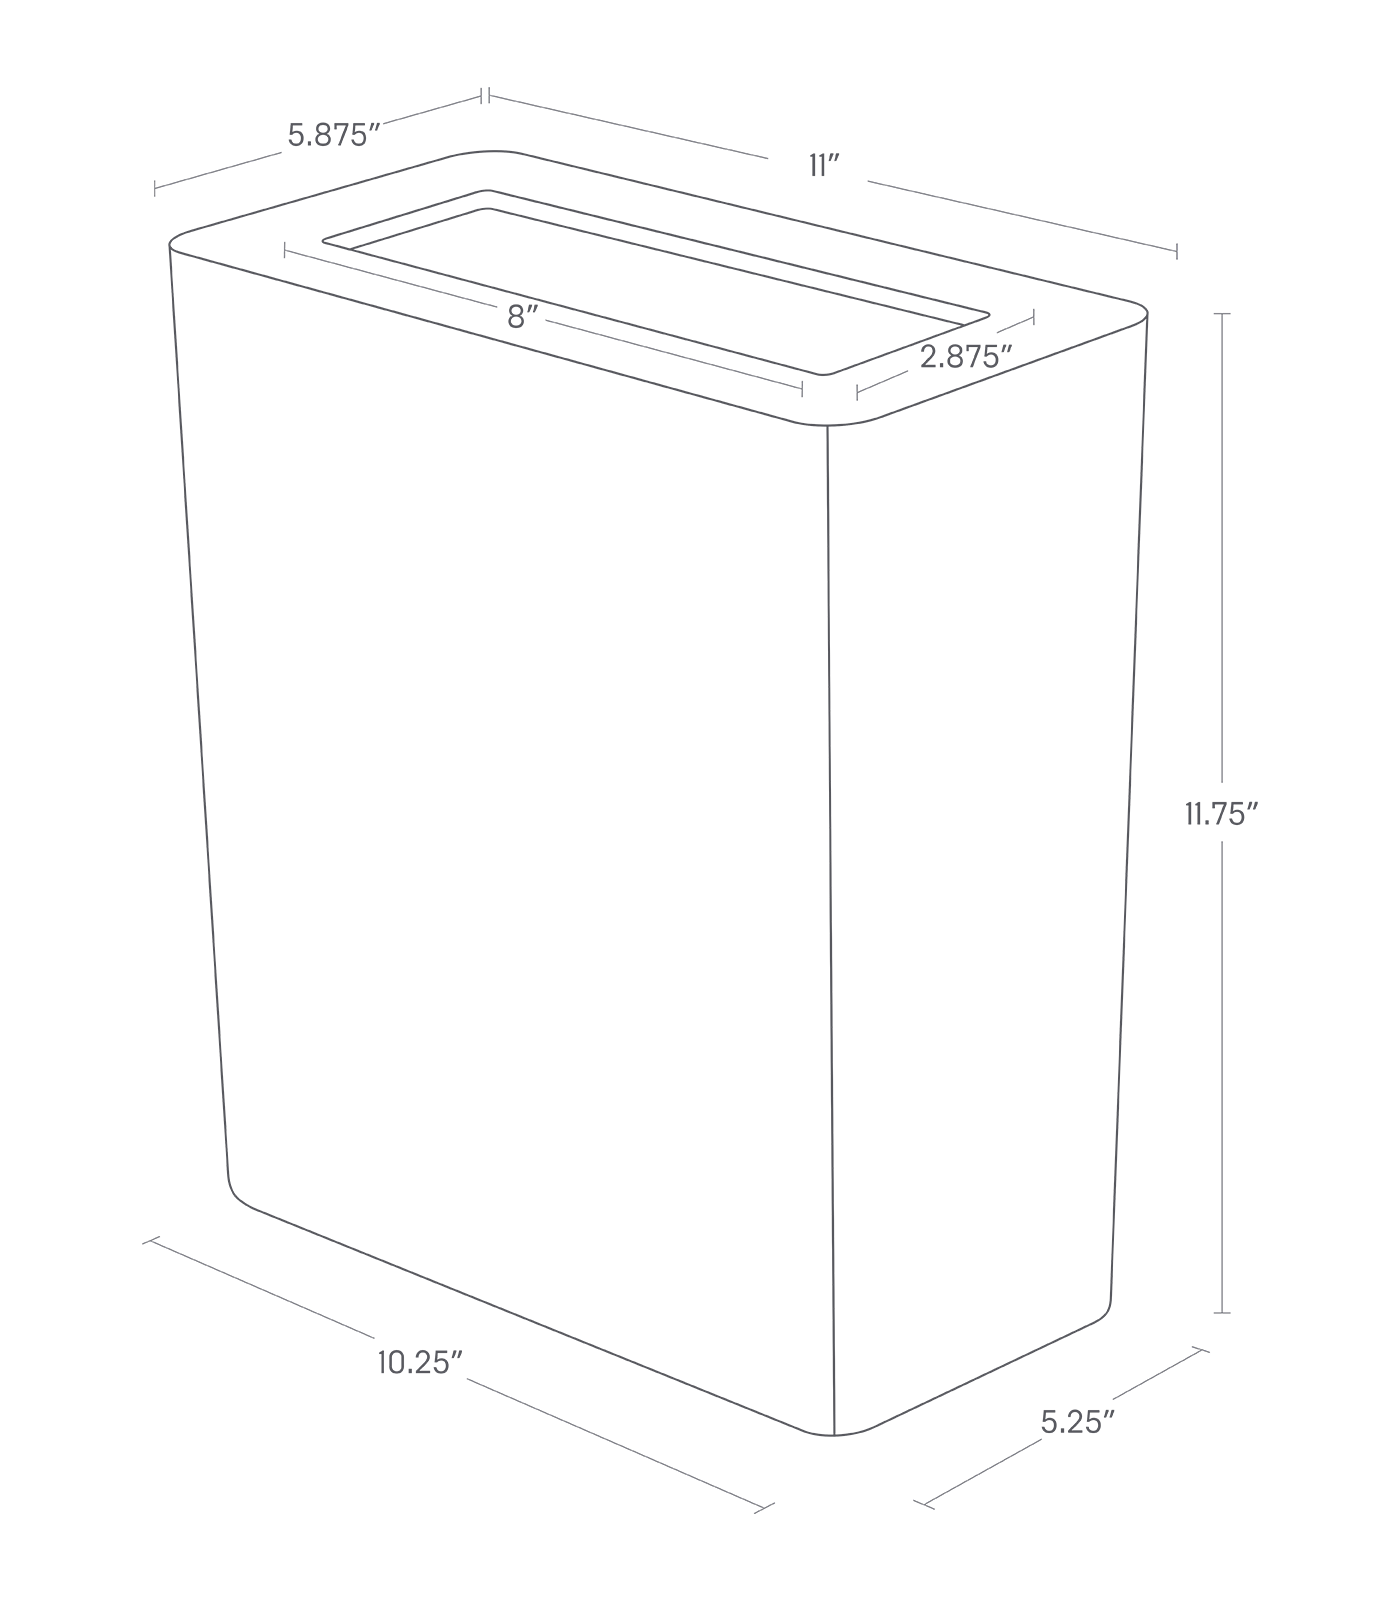 Dimension Image for Trash Can on a white background showing height of 11.75